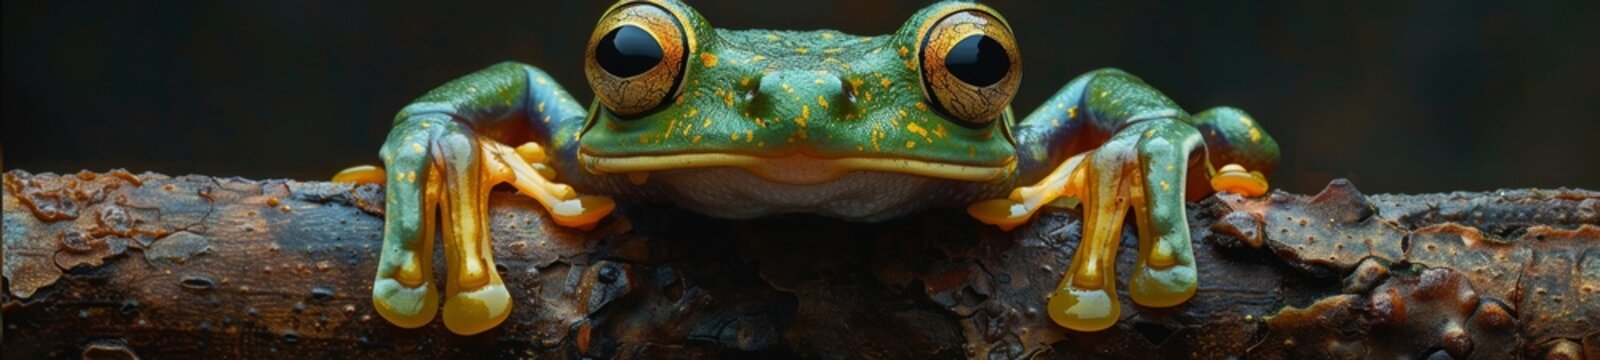 The gliding tree frog leaps and glides among branches using its webbed feet. This unique ability aids in escaping predators and locating food in the rainforest's varied layers.